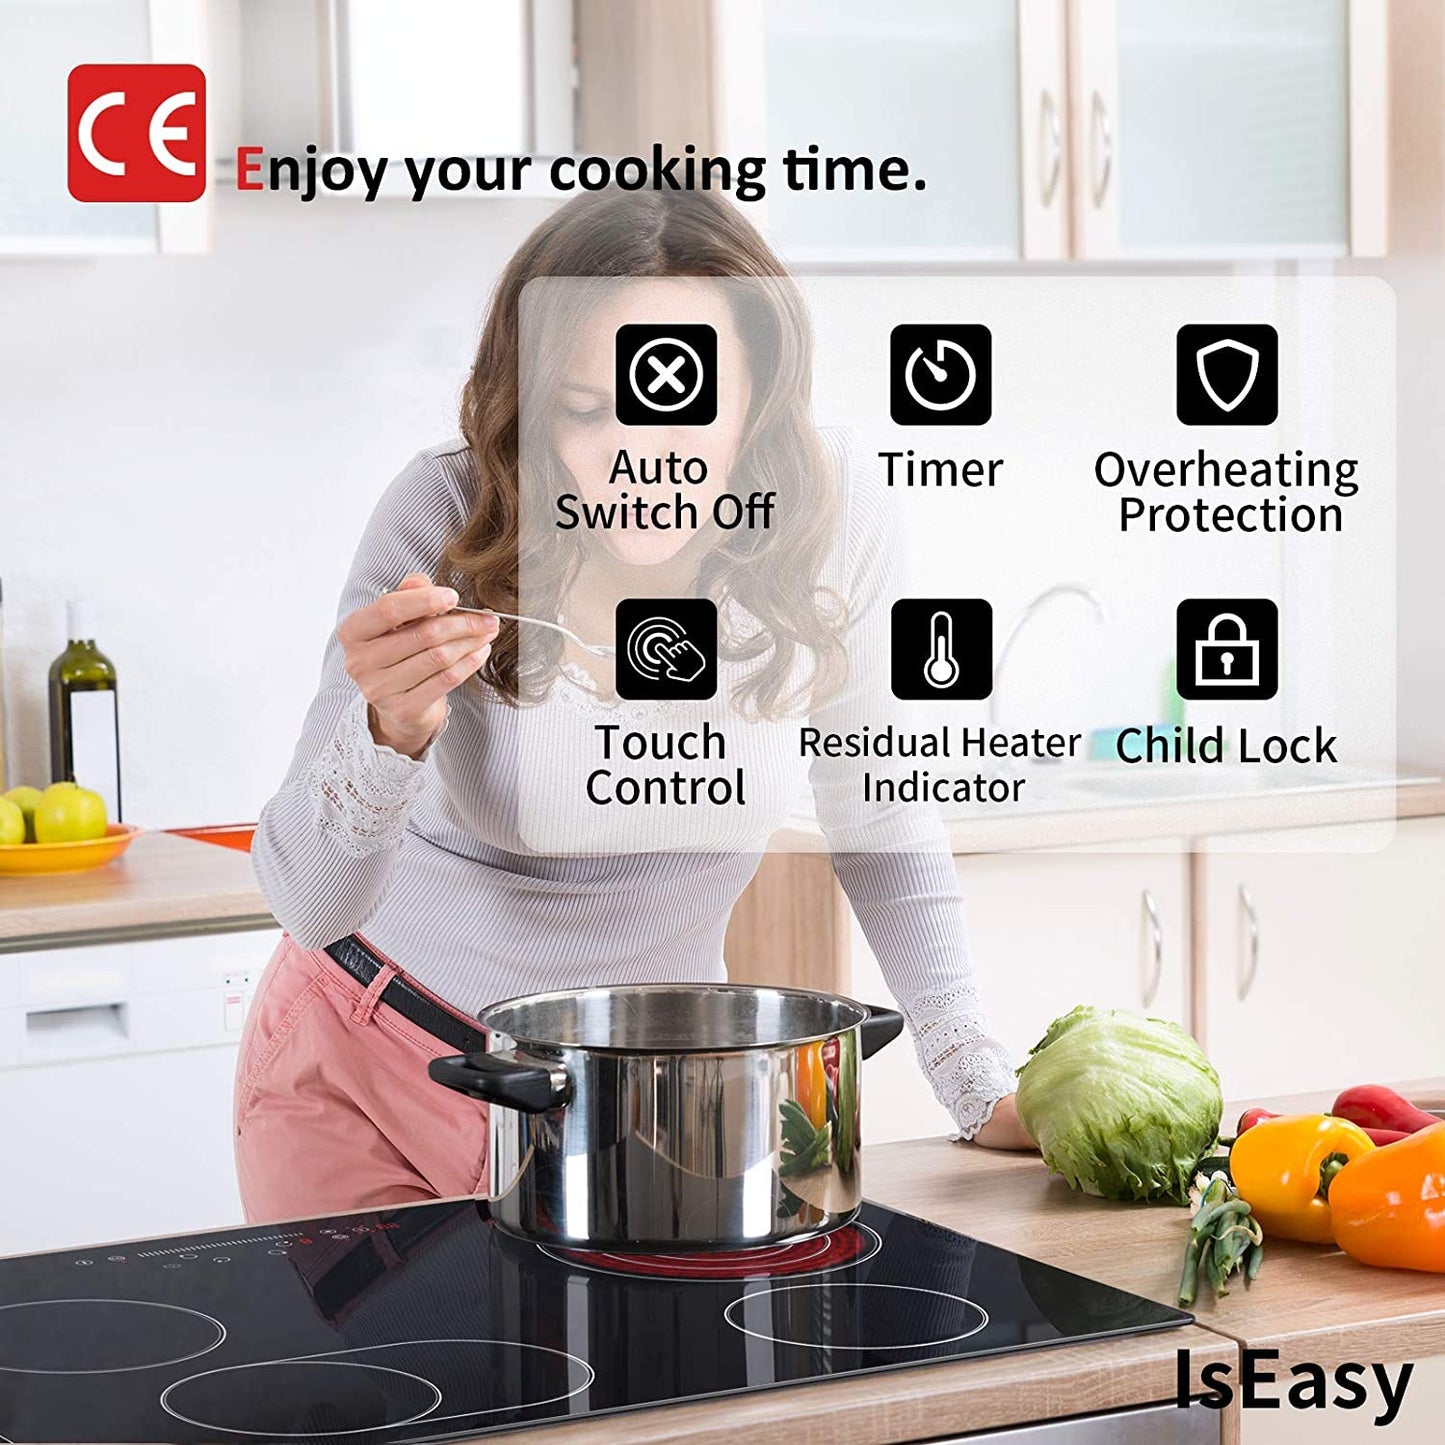 Electric Cooktop Ceramic Stove 4 Burners 30 inch Built-in Countertop Burners Cooker Satin Glass in Black Touch Sensor Control,Timer,Child Safety Lock,9 Power Levels,220-240V 7200W